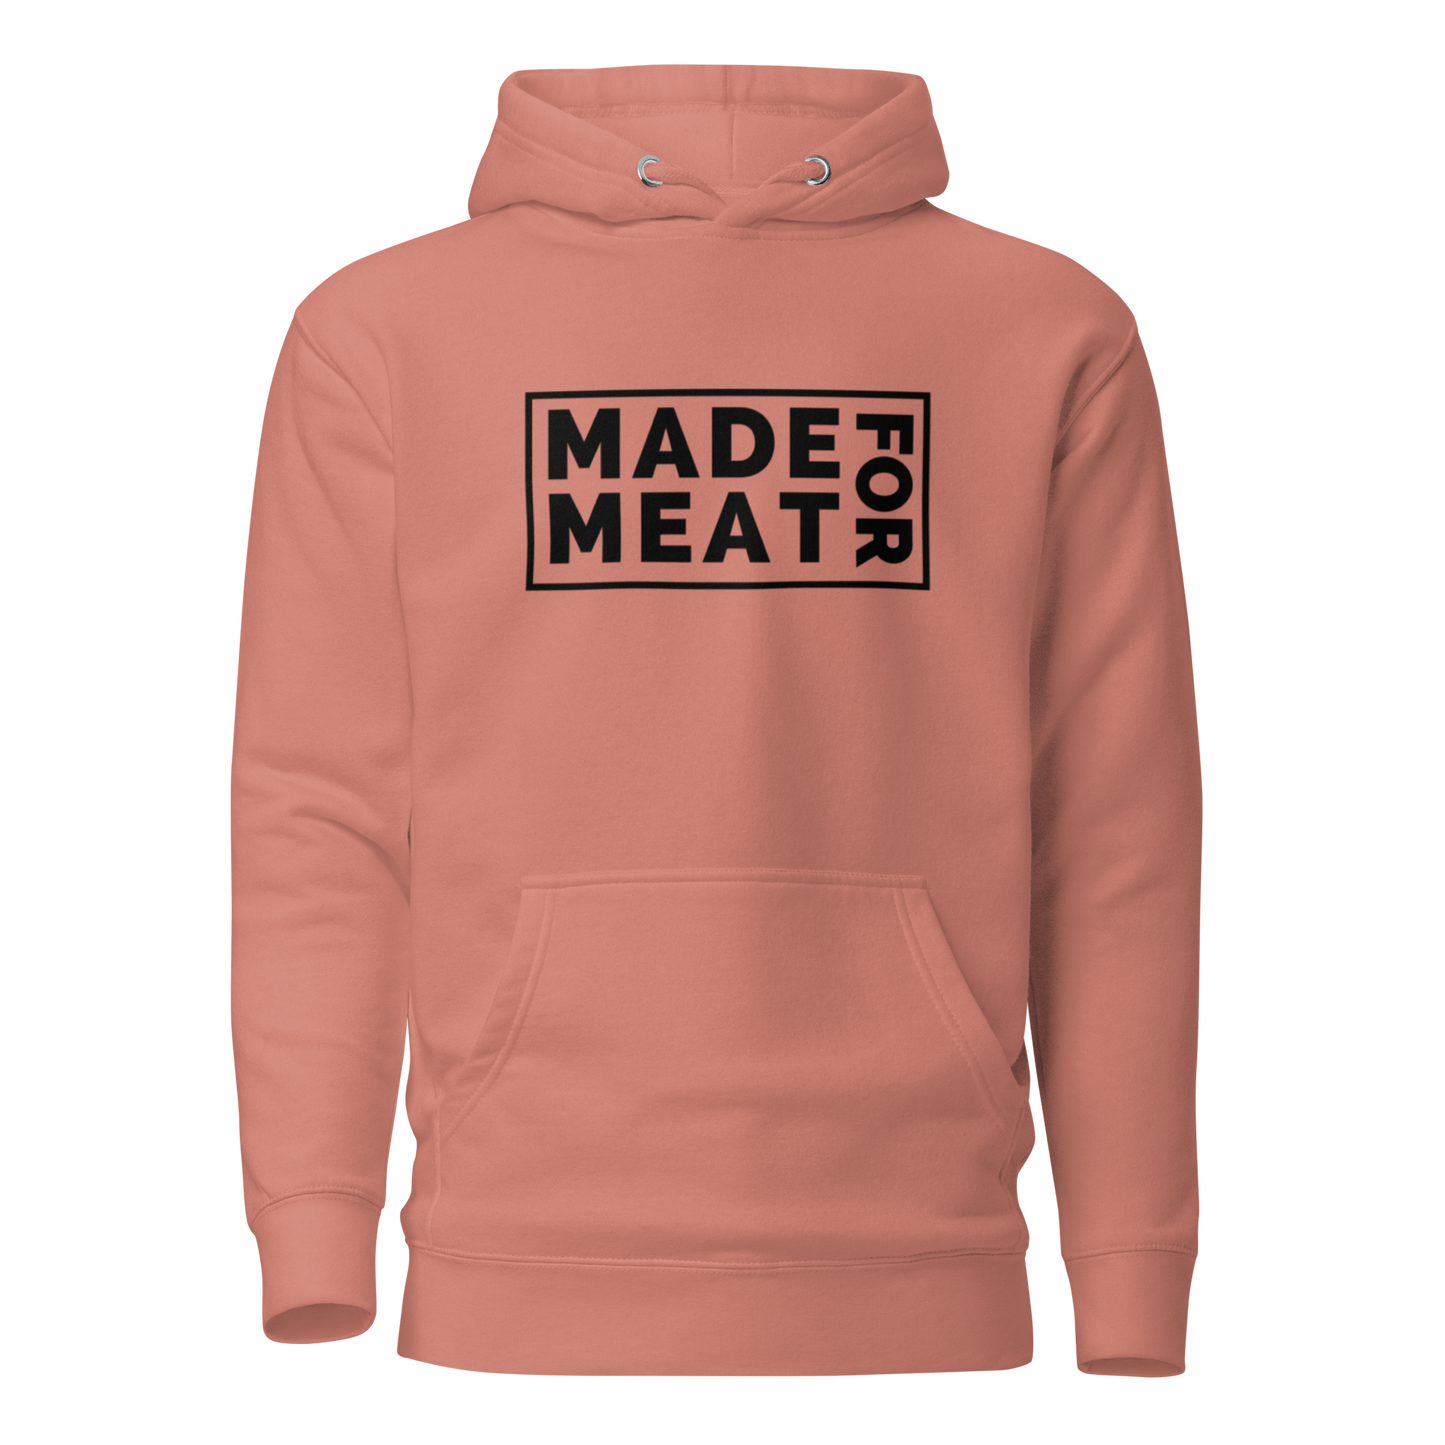 Made for Meat Hoodie